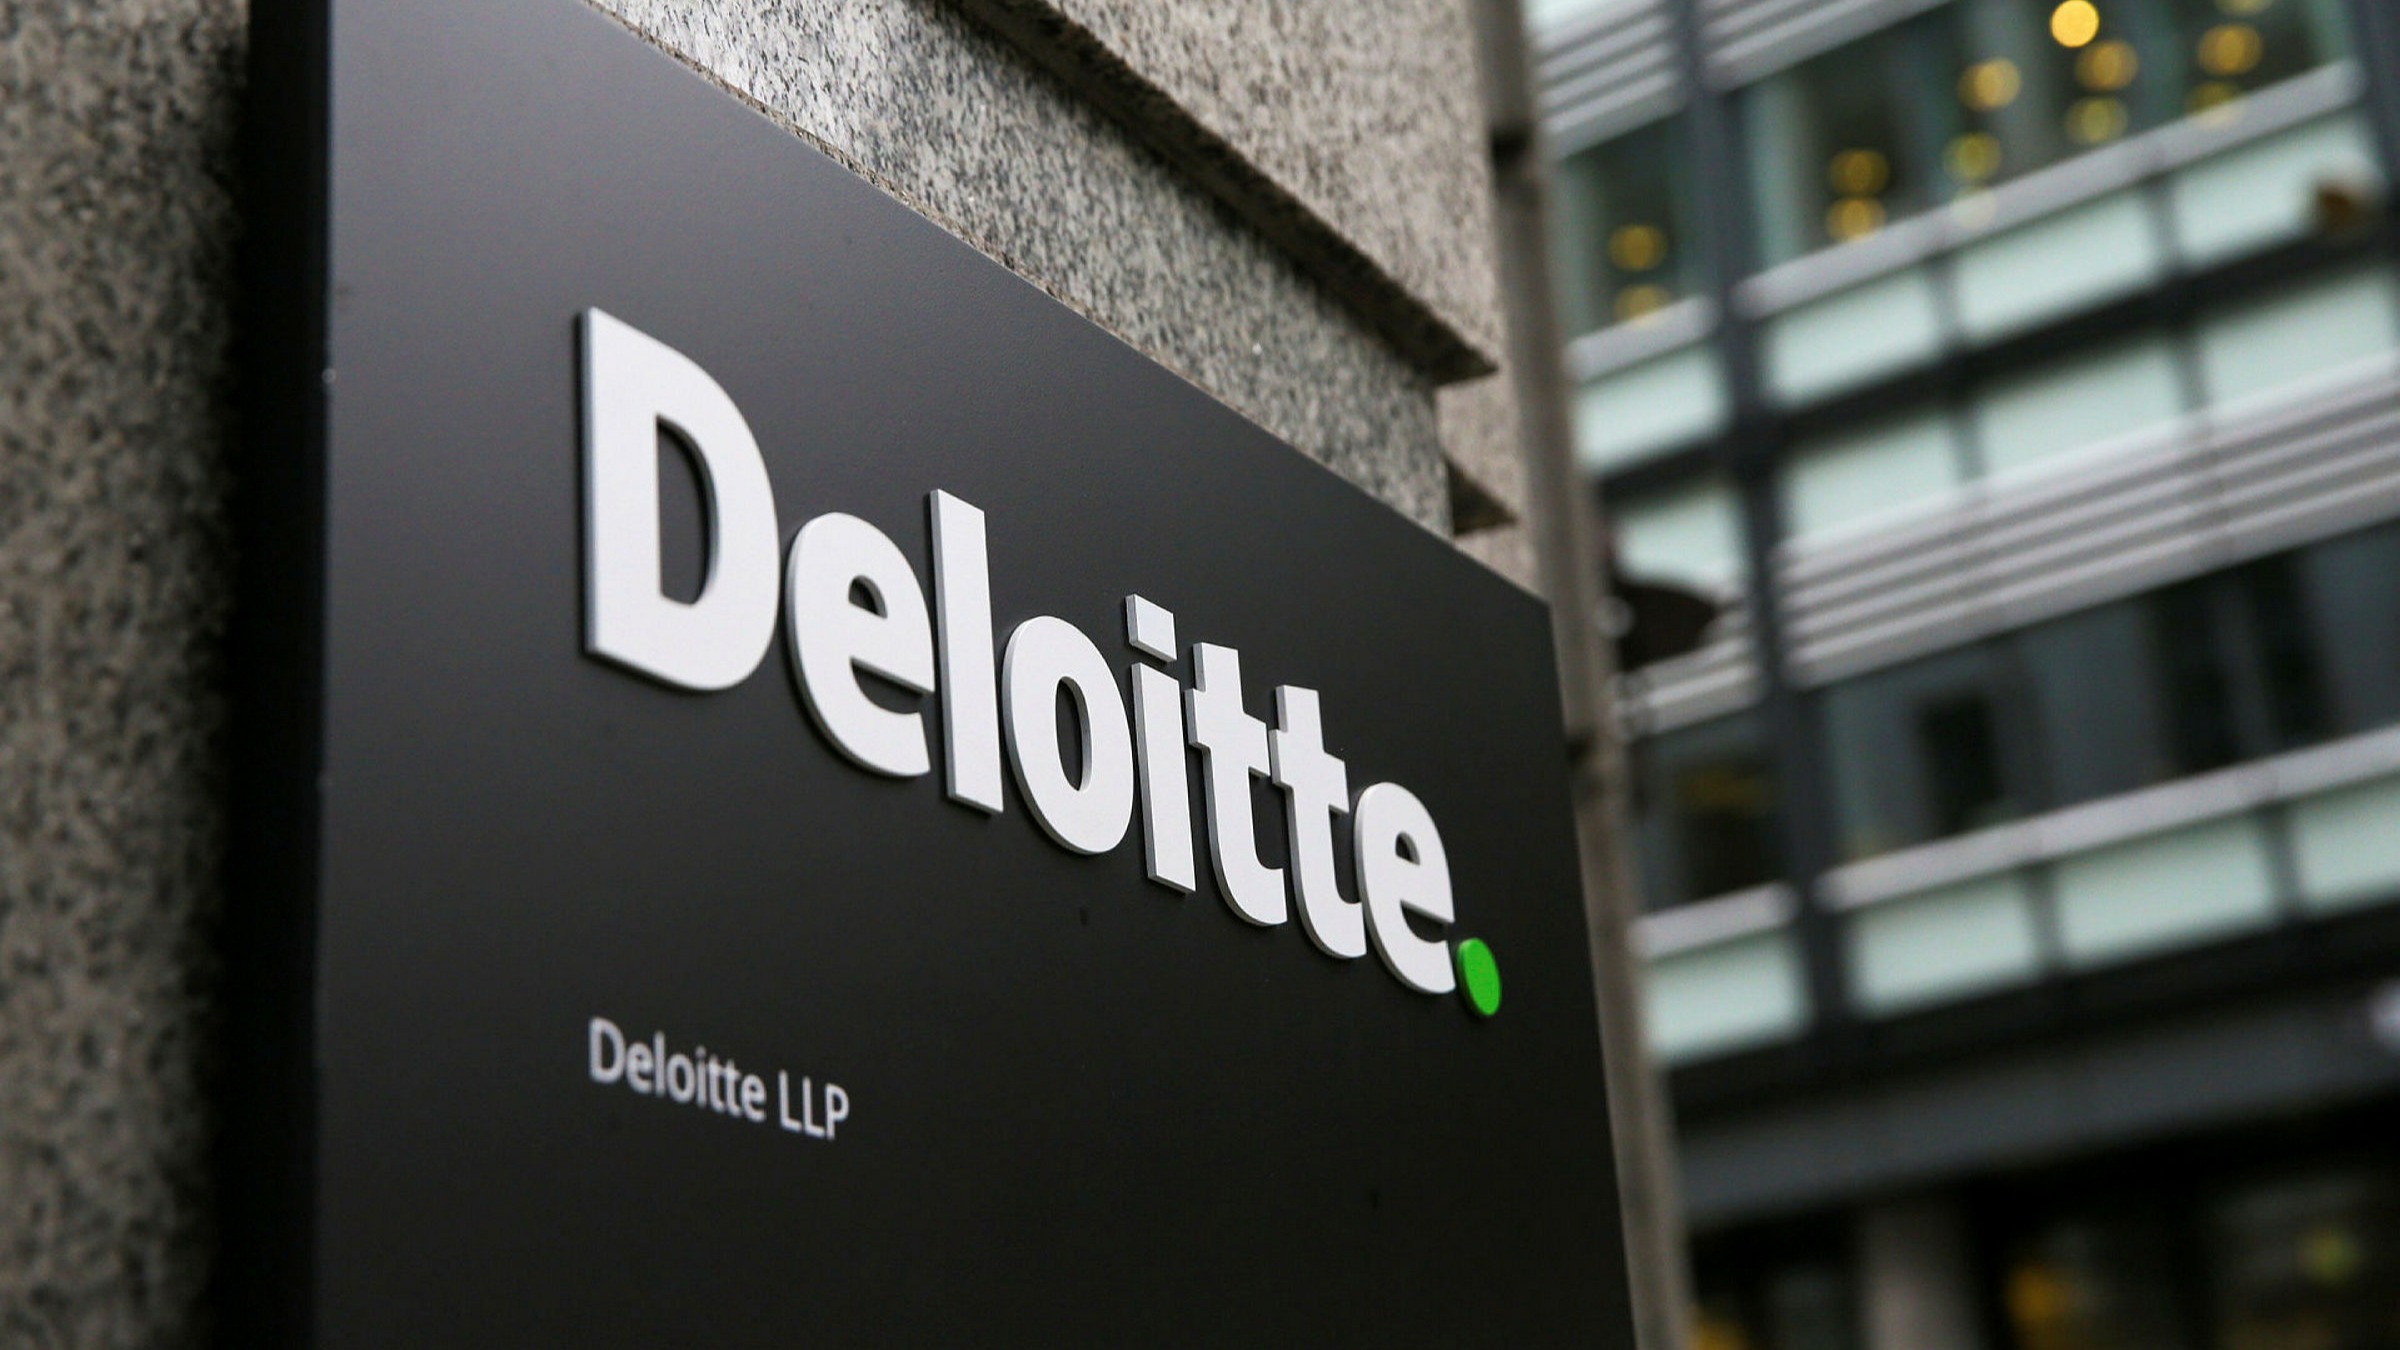 U.S contracts Deloitte to research Libya’s oil sector